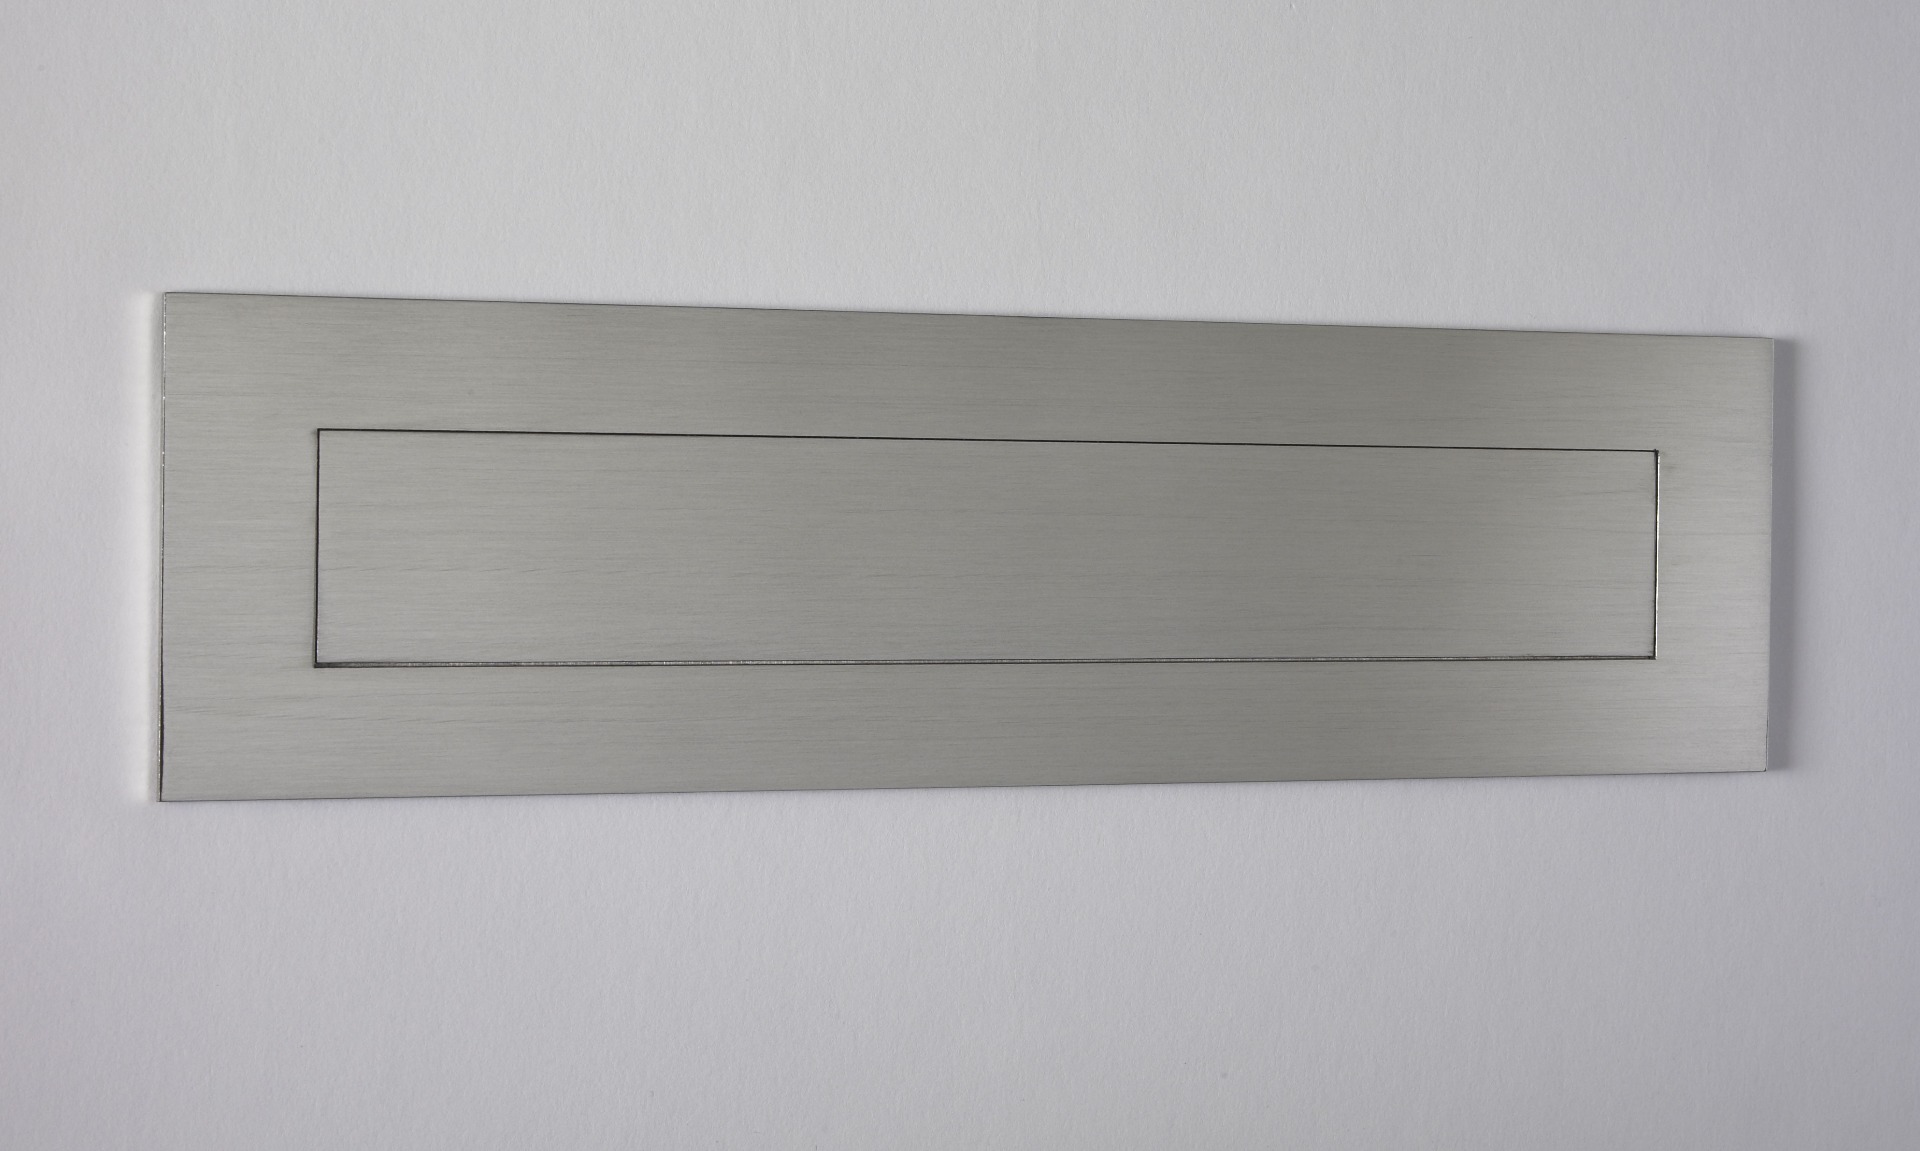 Stainless Steel Mail Slot - LARGE (15.7 in. x 3.9 in.) - Front Piece Only (Choose Finish)